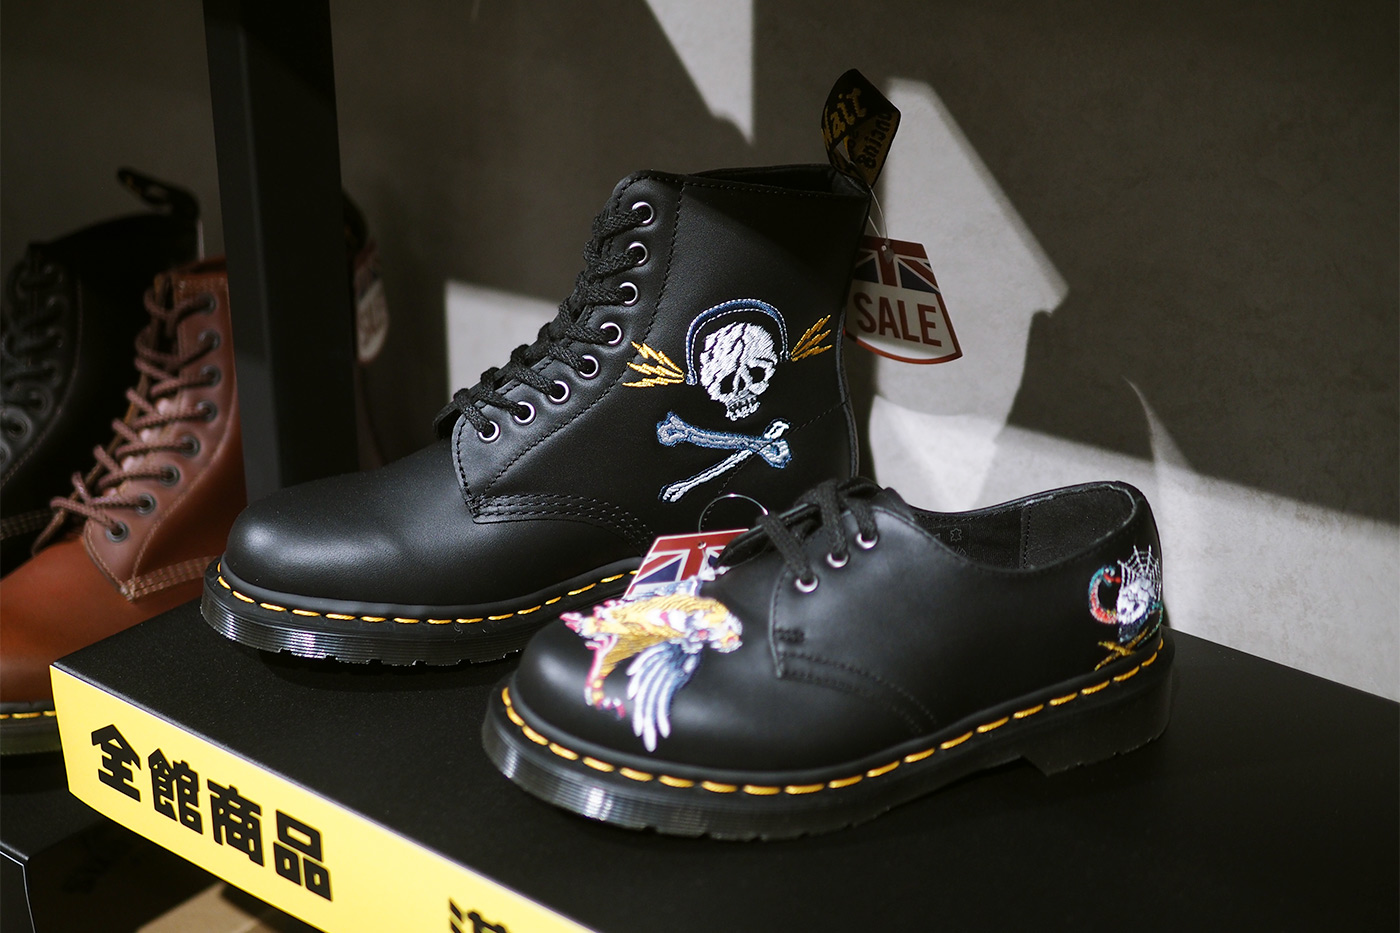 drmartens-sale-boots-06